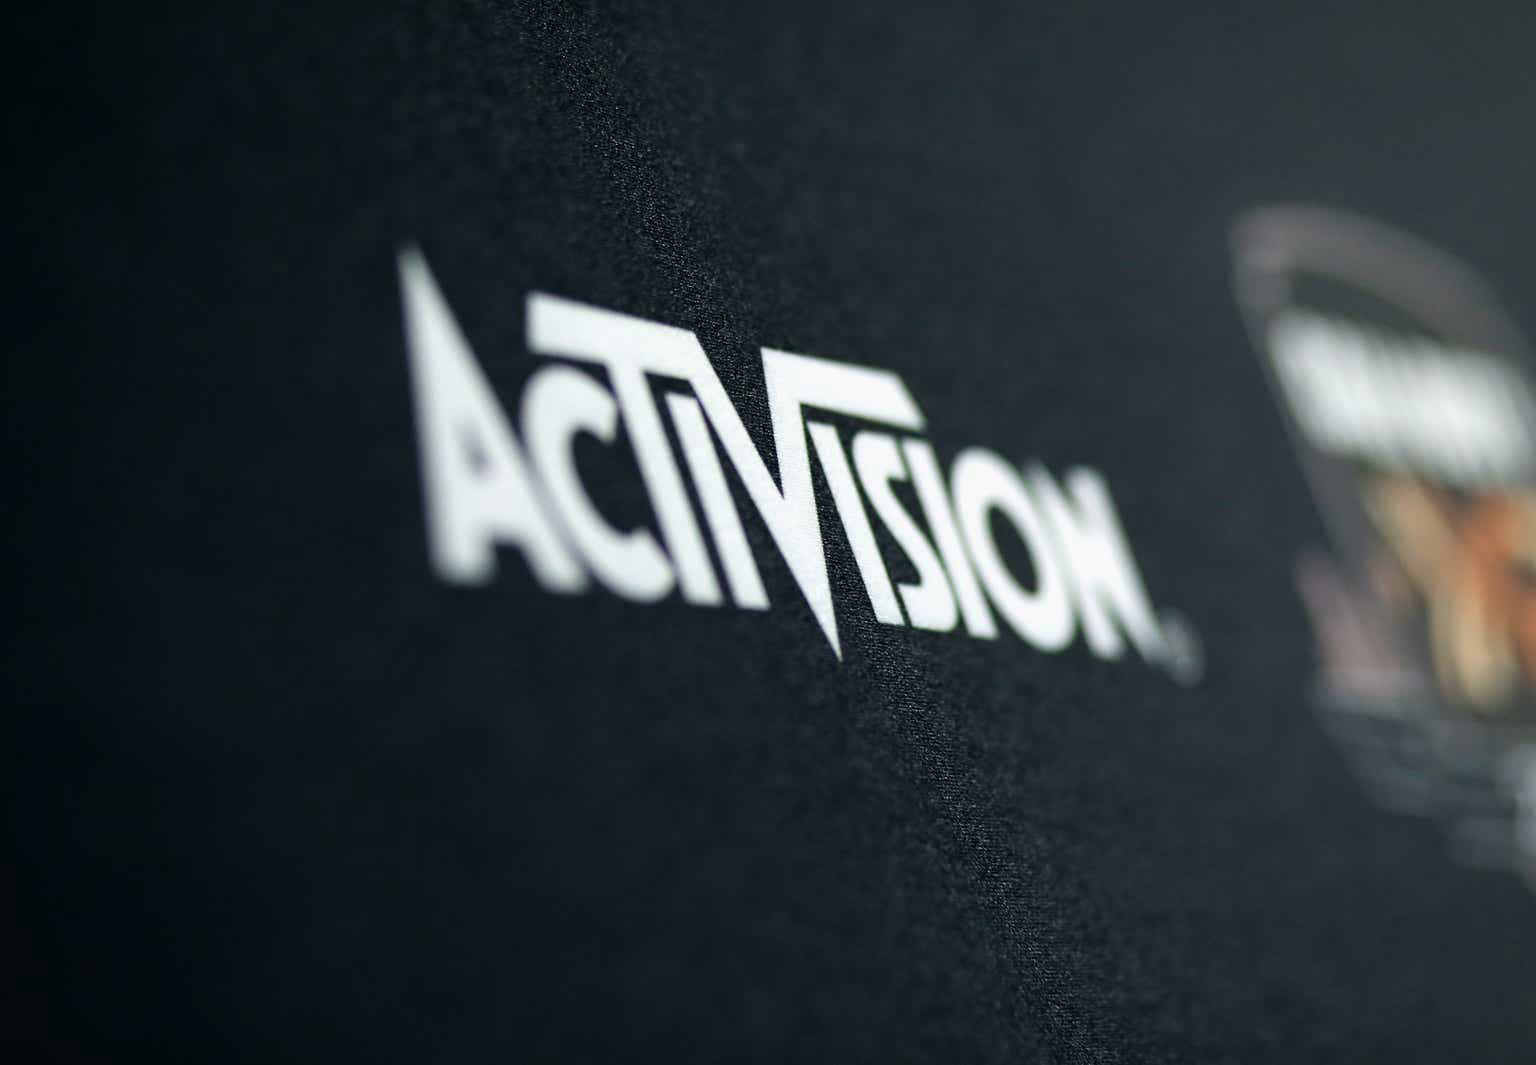 Microsoft Closes $69B Acquisition Of Activision Blizzard, Creating Video  Game Behemoth – Deadline